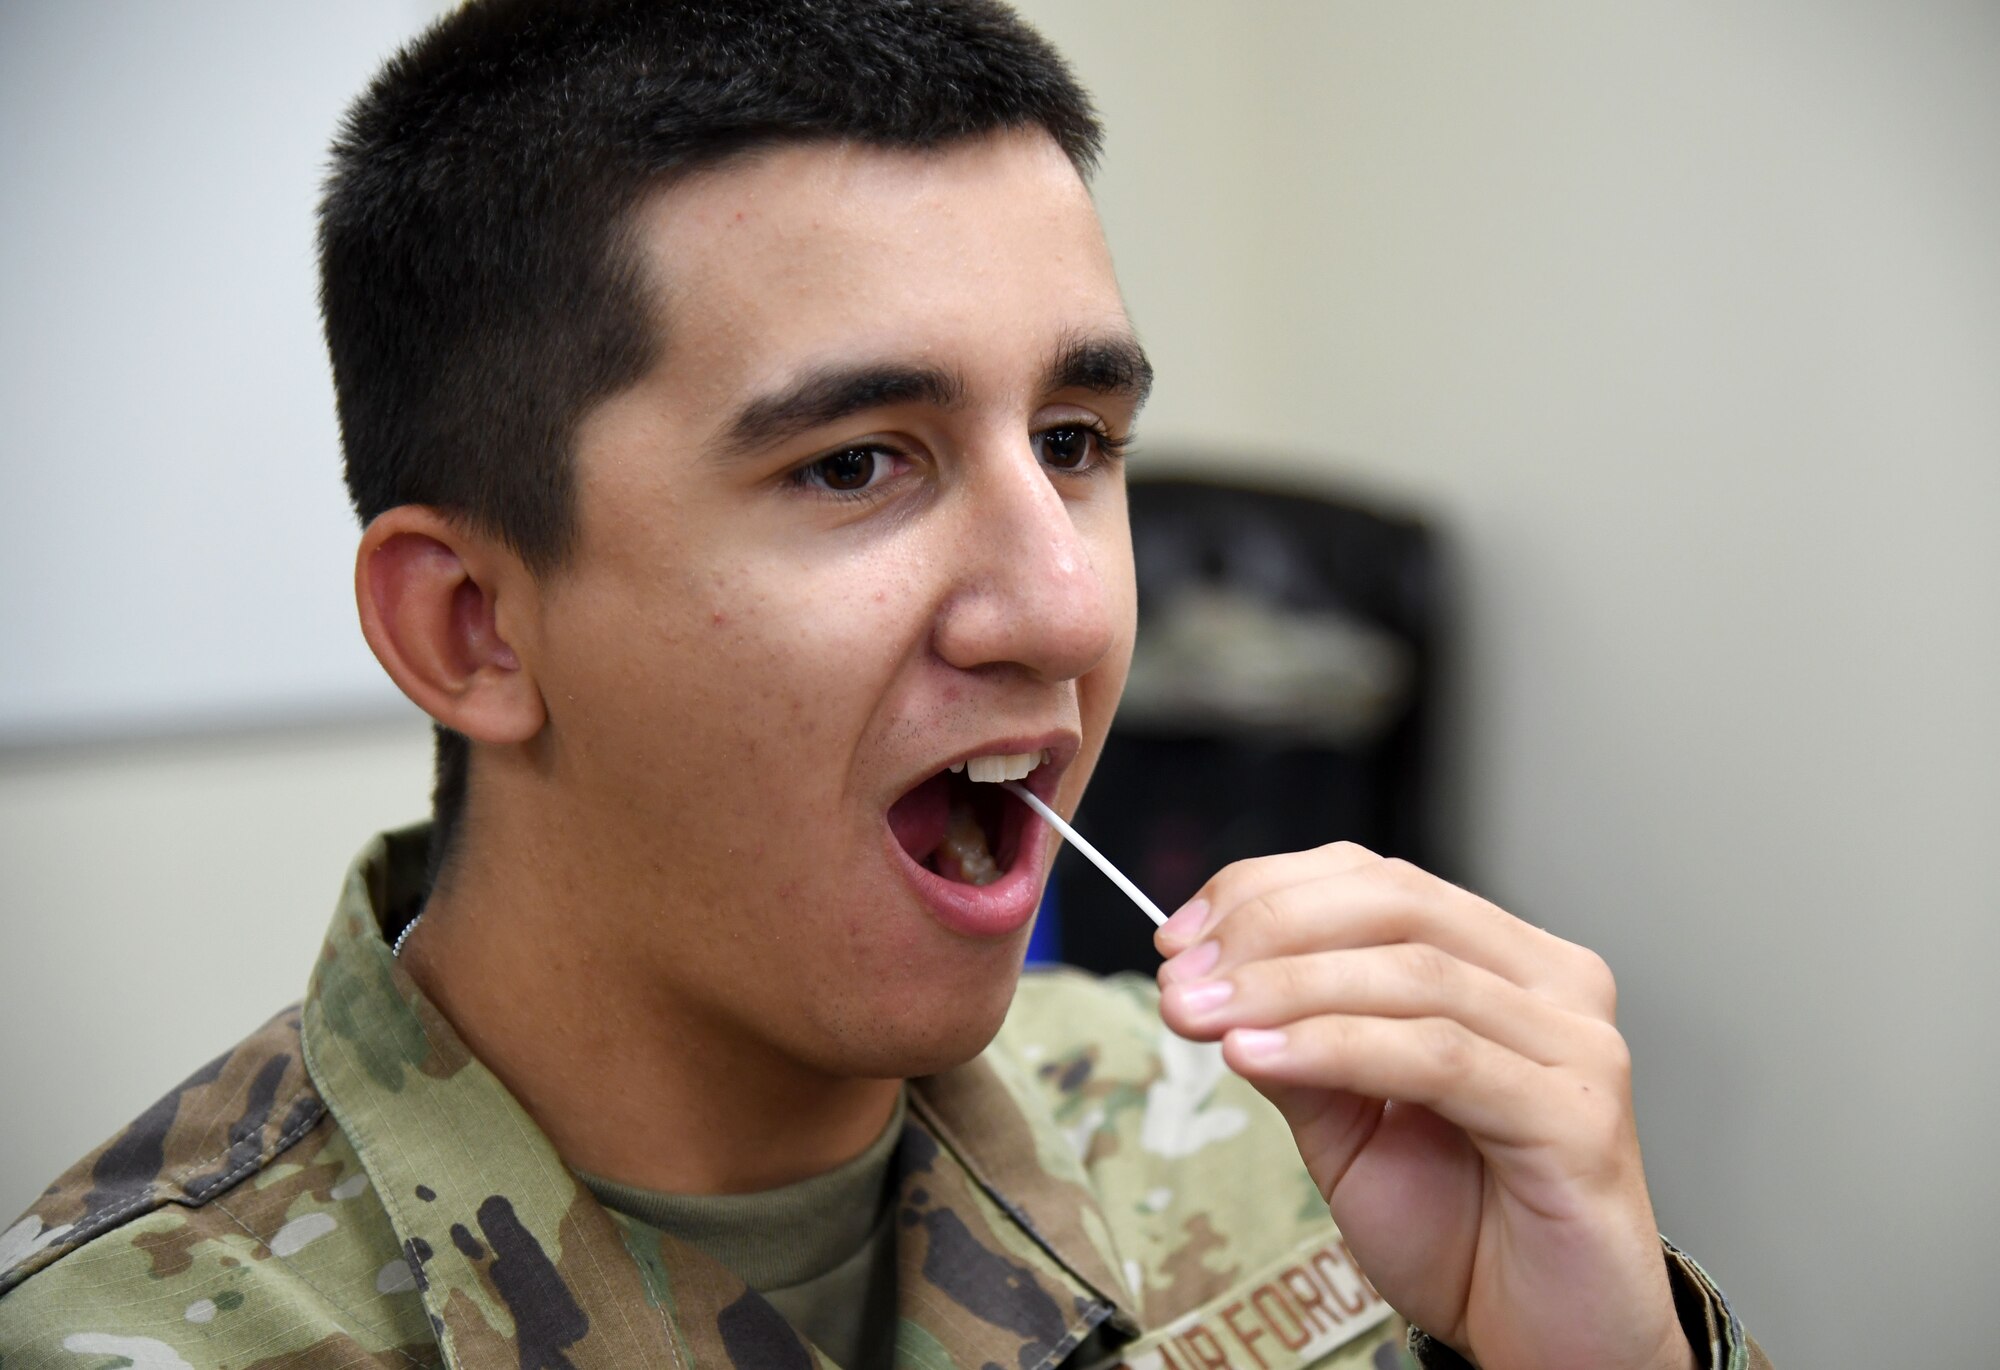 U.S. Air Force Airman Samuel Lozano, 334th Training Squadron student, collects a swab sample during a bone marrow donor registration drive inside Cody Hall at Keesler Air Force Base, Mississippi, Aug. 23, 2022. The 81st Training Group partnered with Second Air Force and the Salute to Life program to host the drive throughout the week at the various training squadrons. (U.S. Air Force photo by Kemberly Groue)